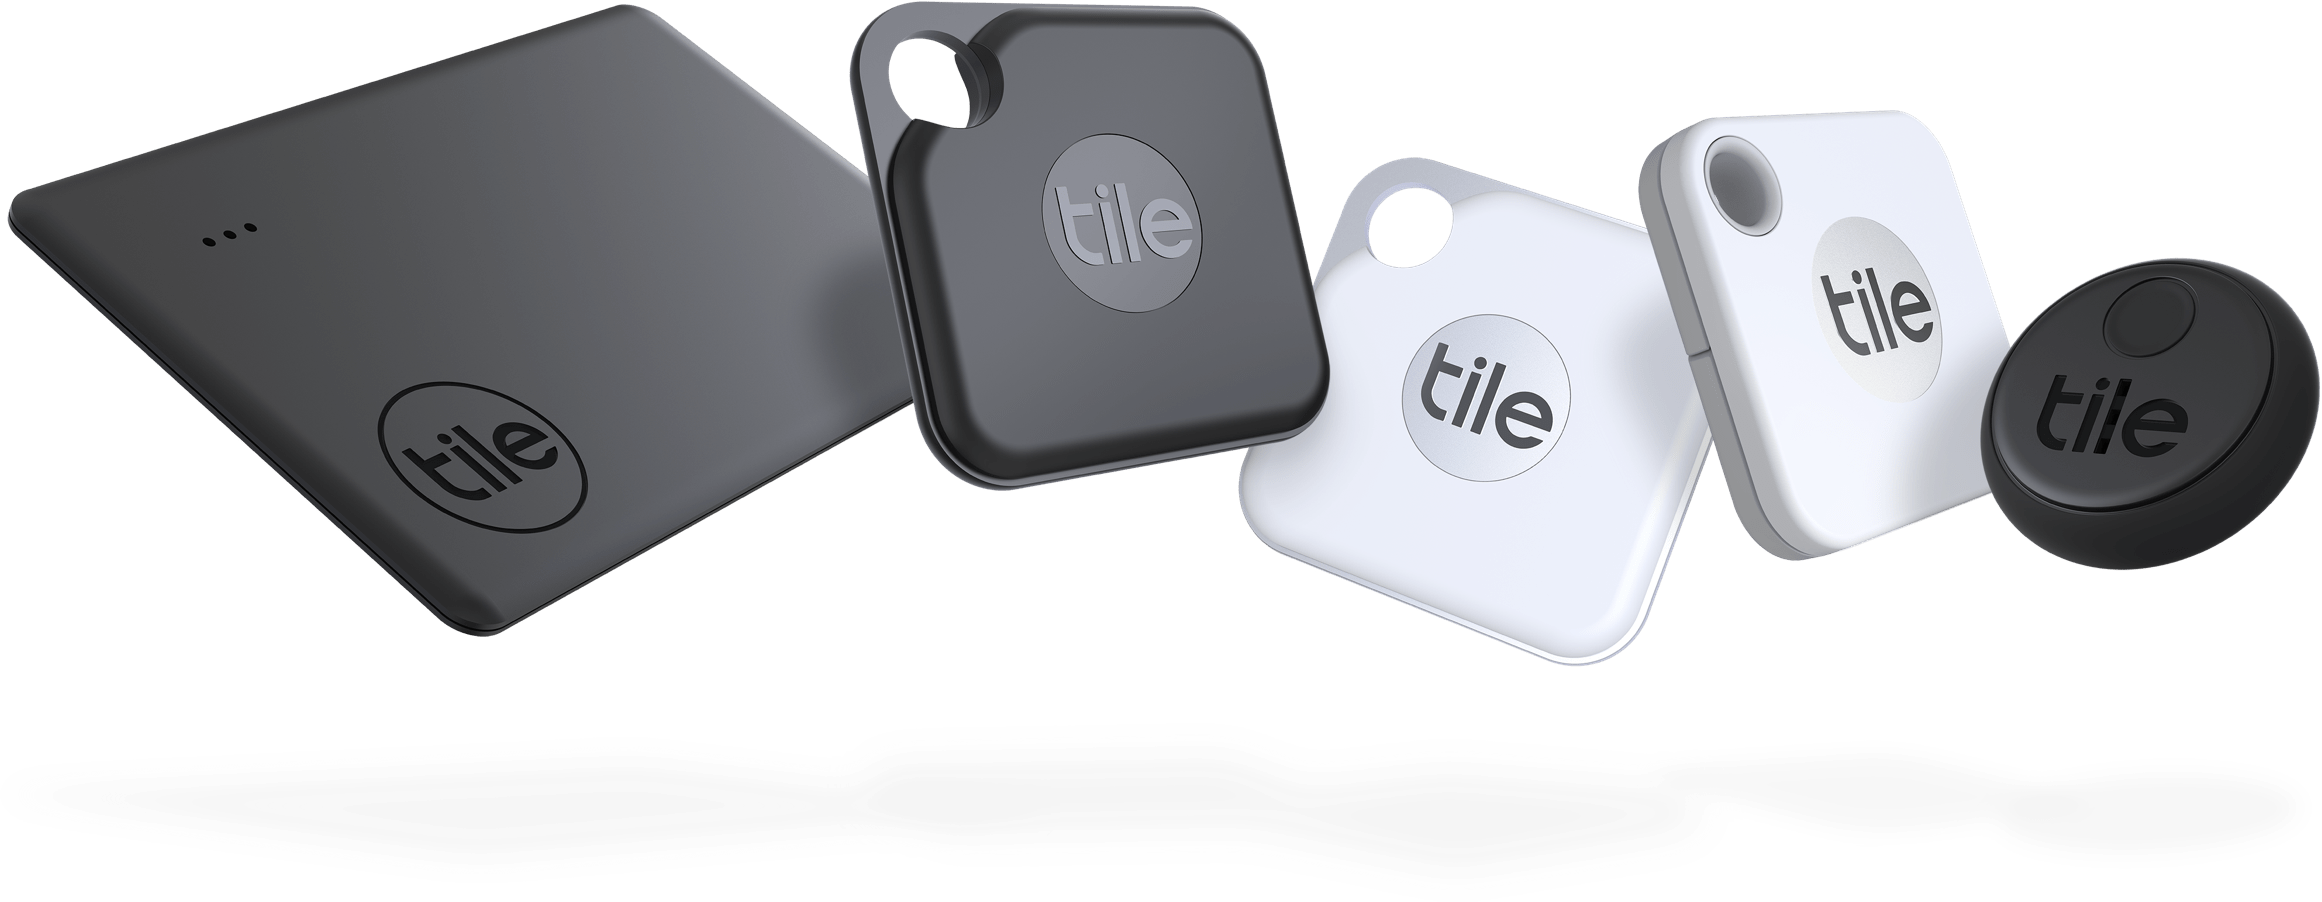 Tracker devices from Tile with a hole on them. :)